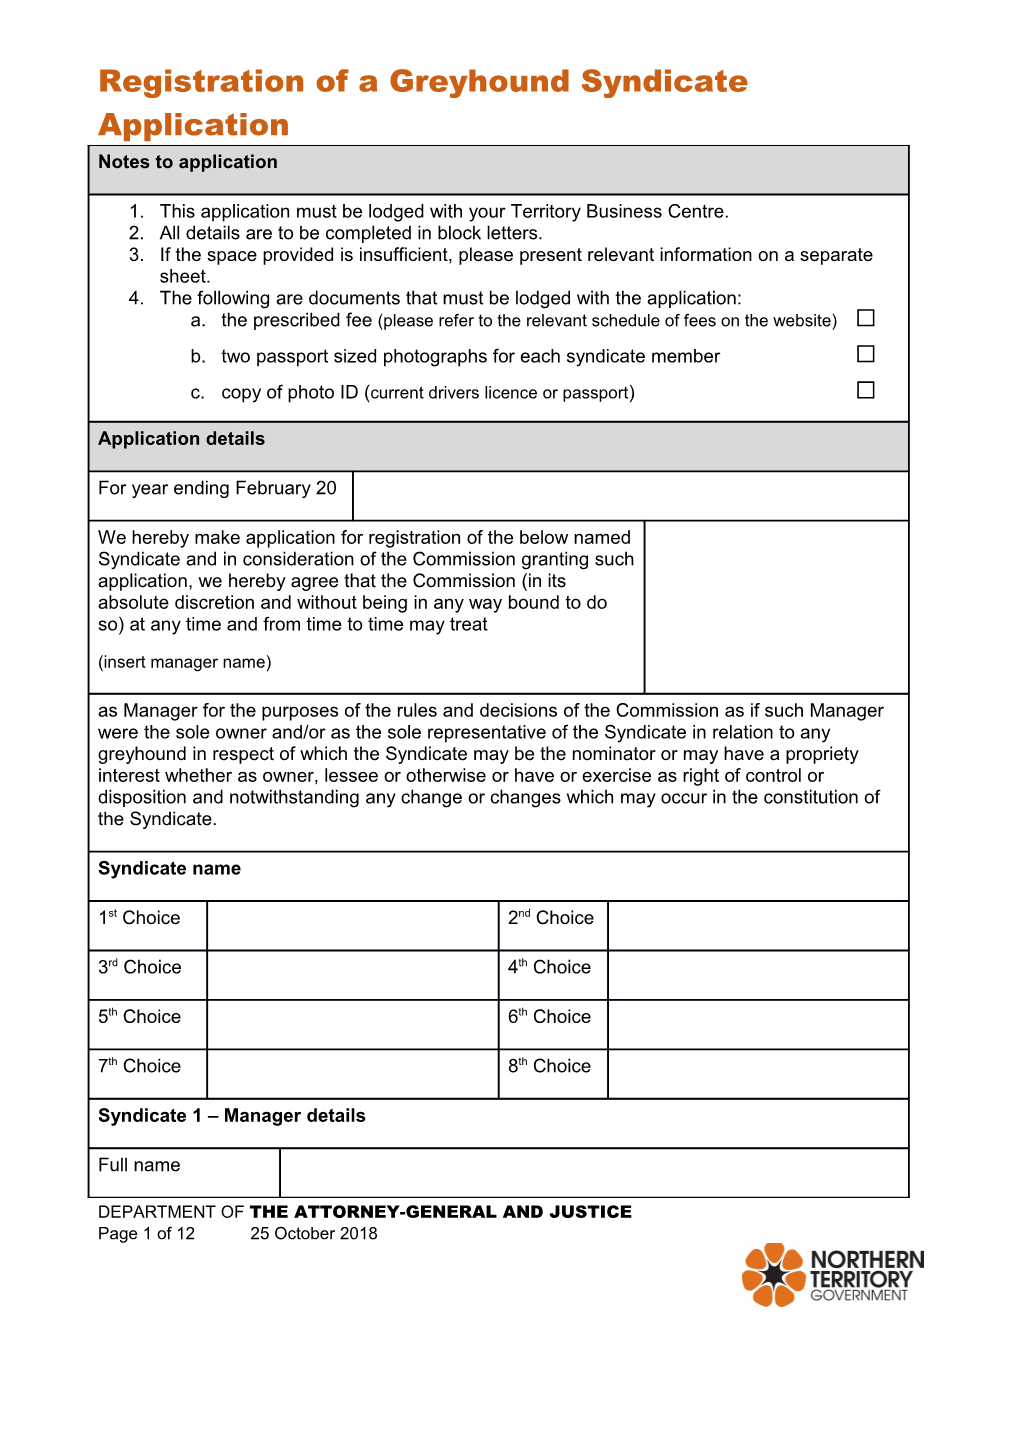 Registration of a Greyhound Syndicate Application